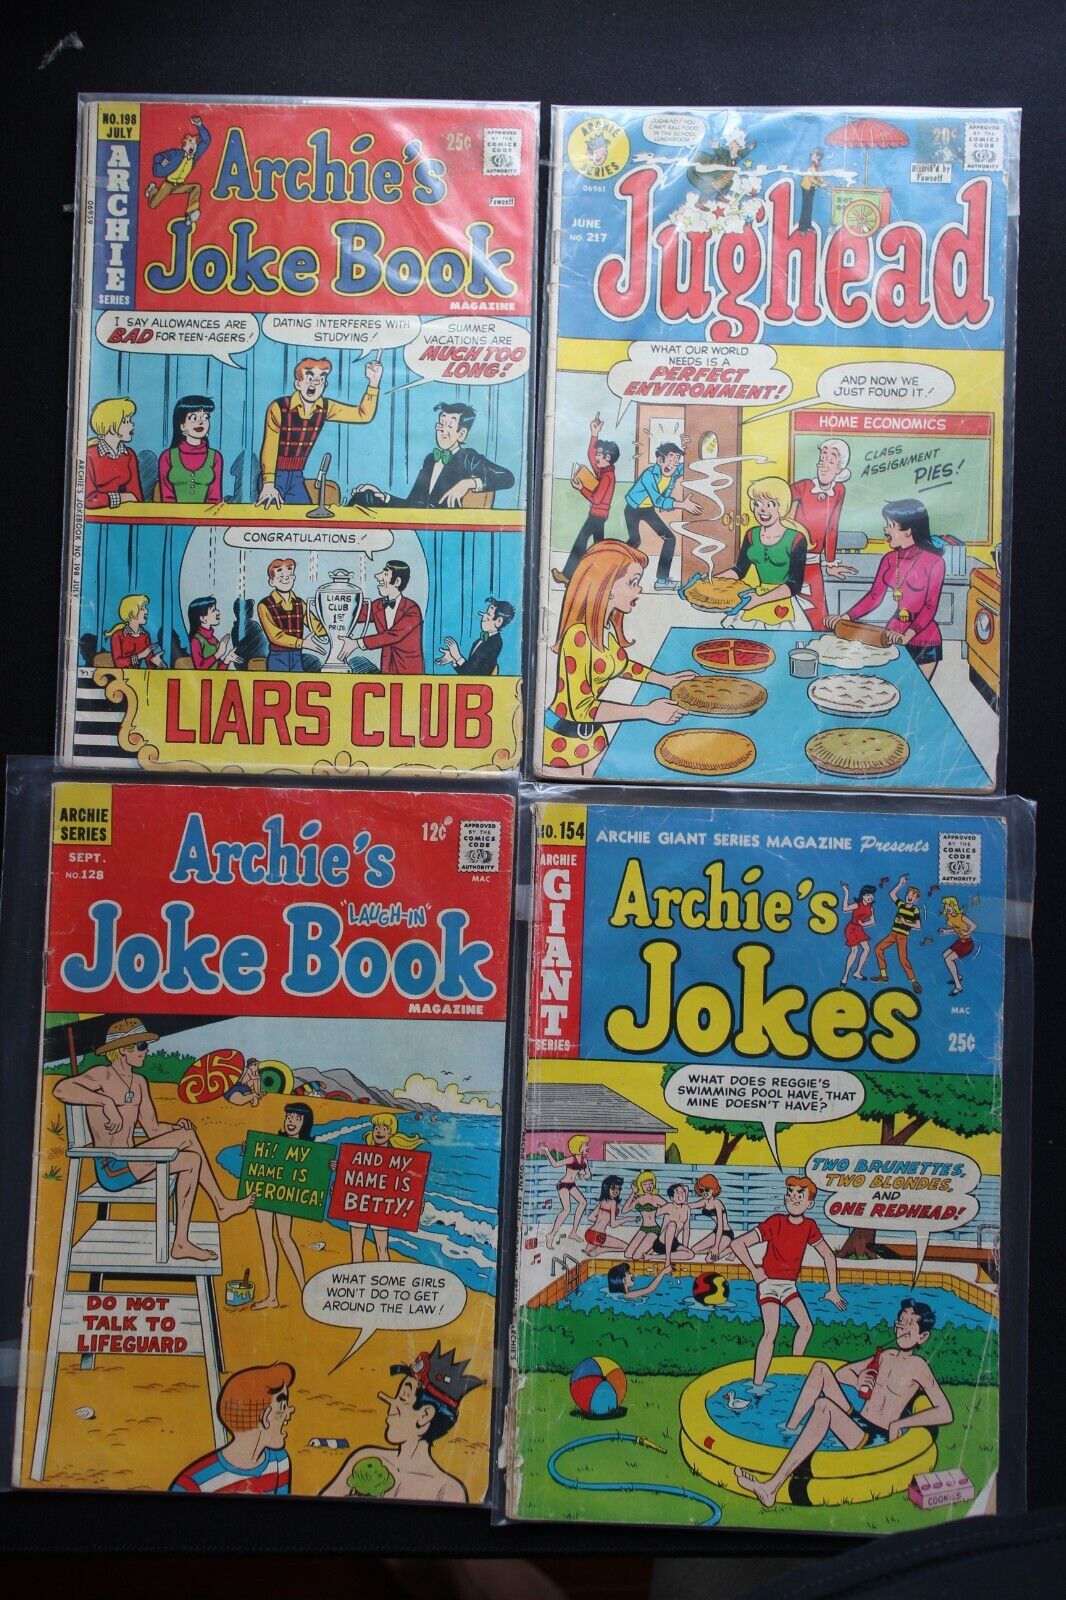 Vintage *ARCHIE* Comic lot of x4, Joke Book, Jughead & Giant series, SHIPS TODAY